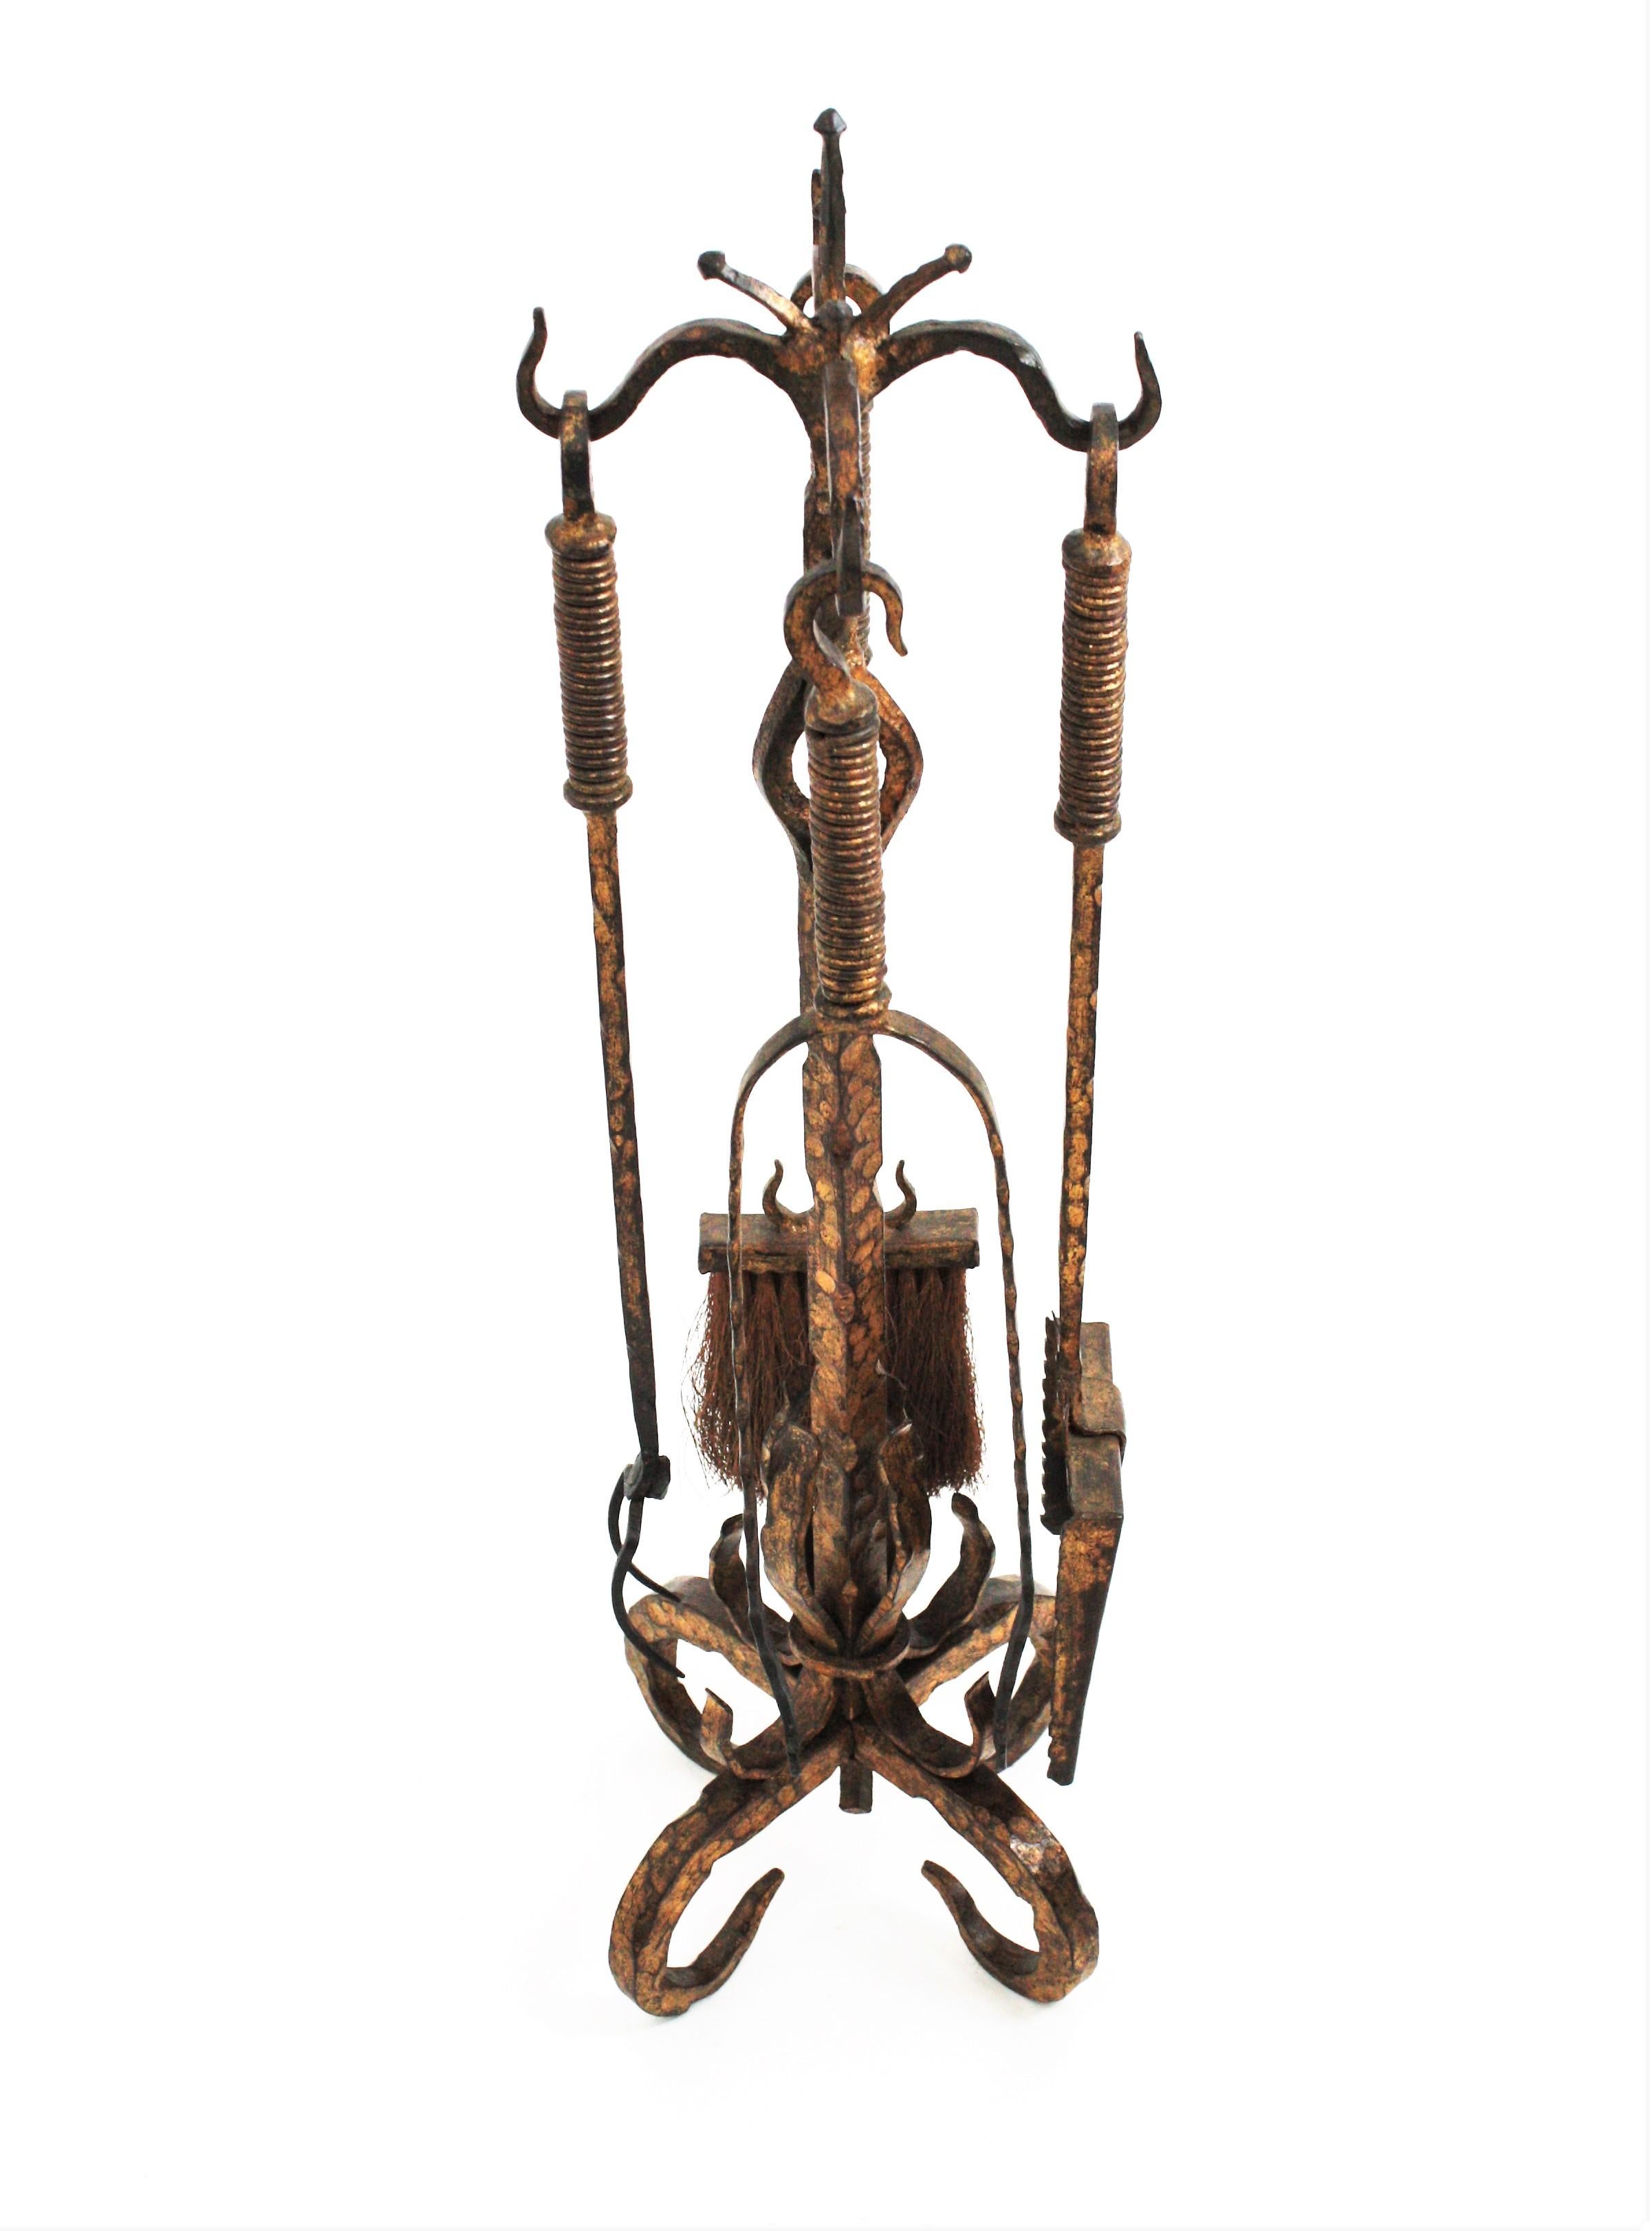 Beautiful Gothic style hand forged antique fireplace tool set on stand. Spain, 1850s
The set includes a stand with four tools: a shovel, a log poker, broom, and tongs. The rack stands up on a four-footed base with scroll-ending feet.
All the tools